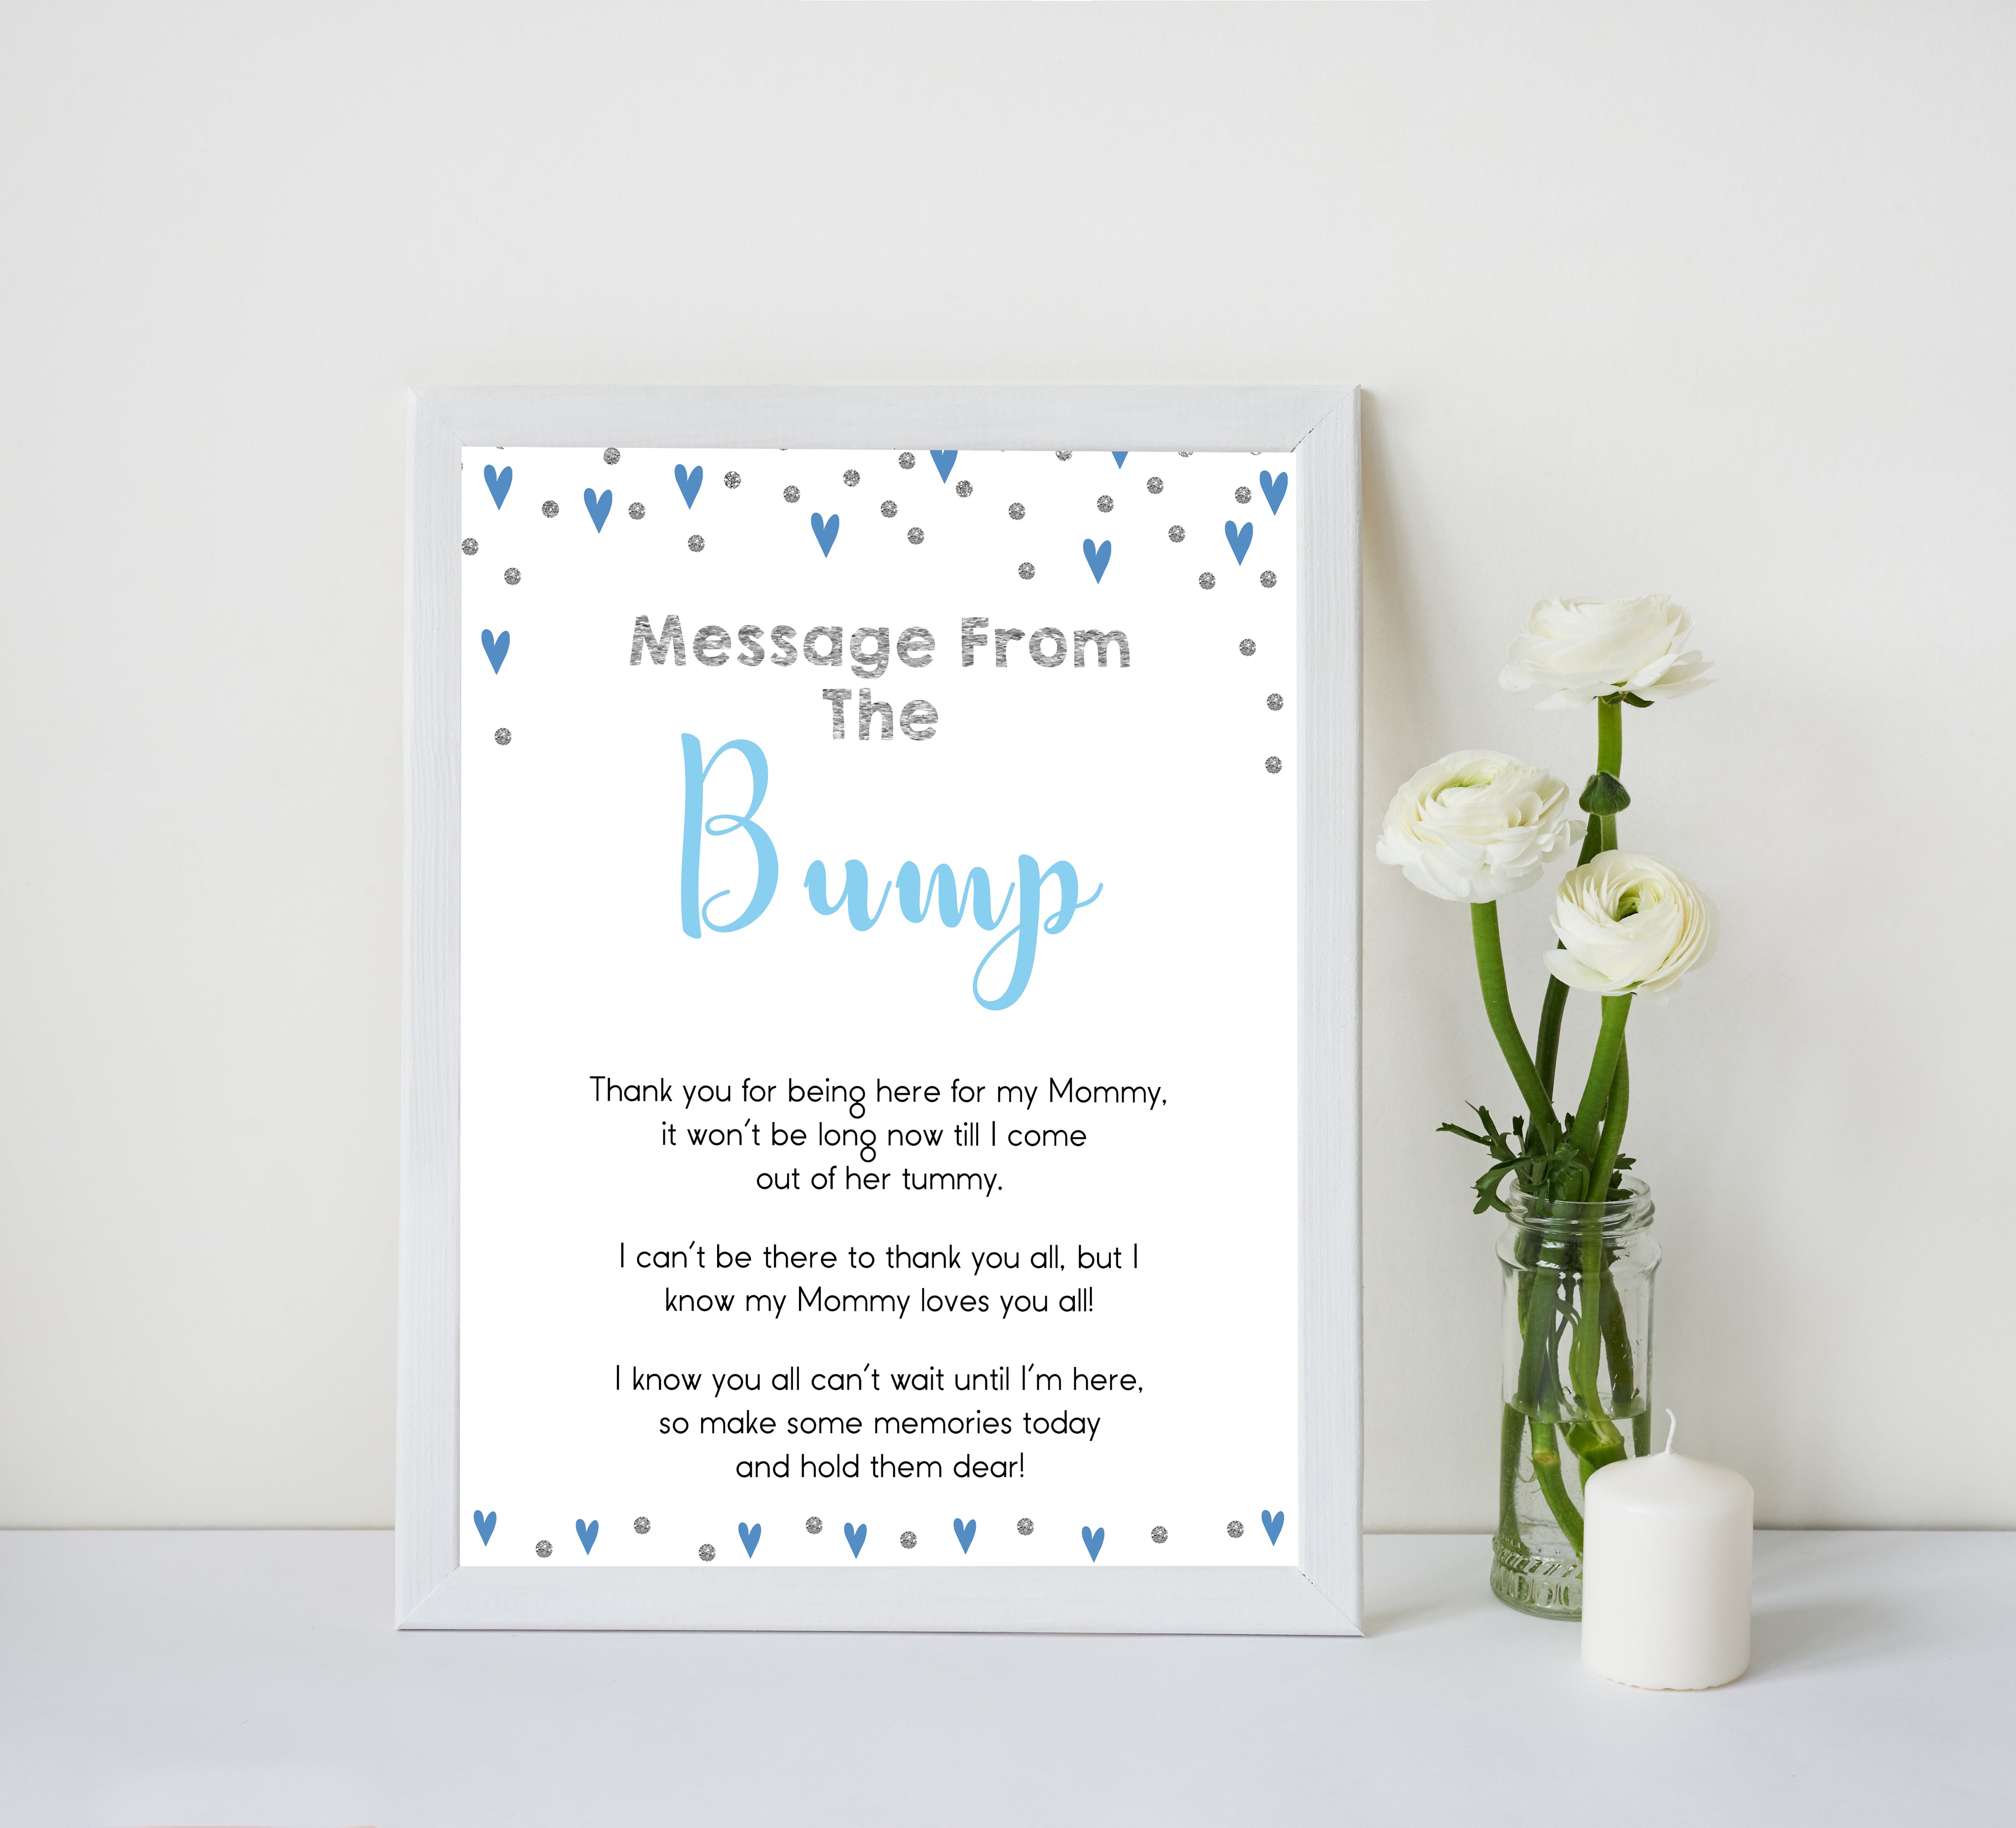 message from the bump, baby message, Printable baby shower games, small blue hearts fun baby games, baby shower games, fun baby shower ideas, top baby shower ideas, silver baby shower, blue hearts baby shower ideas